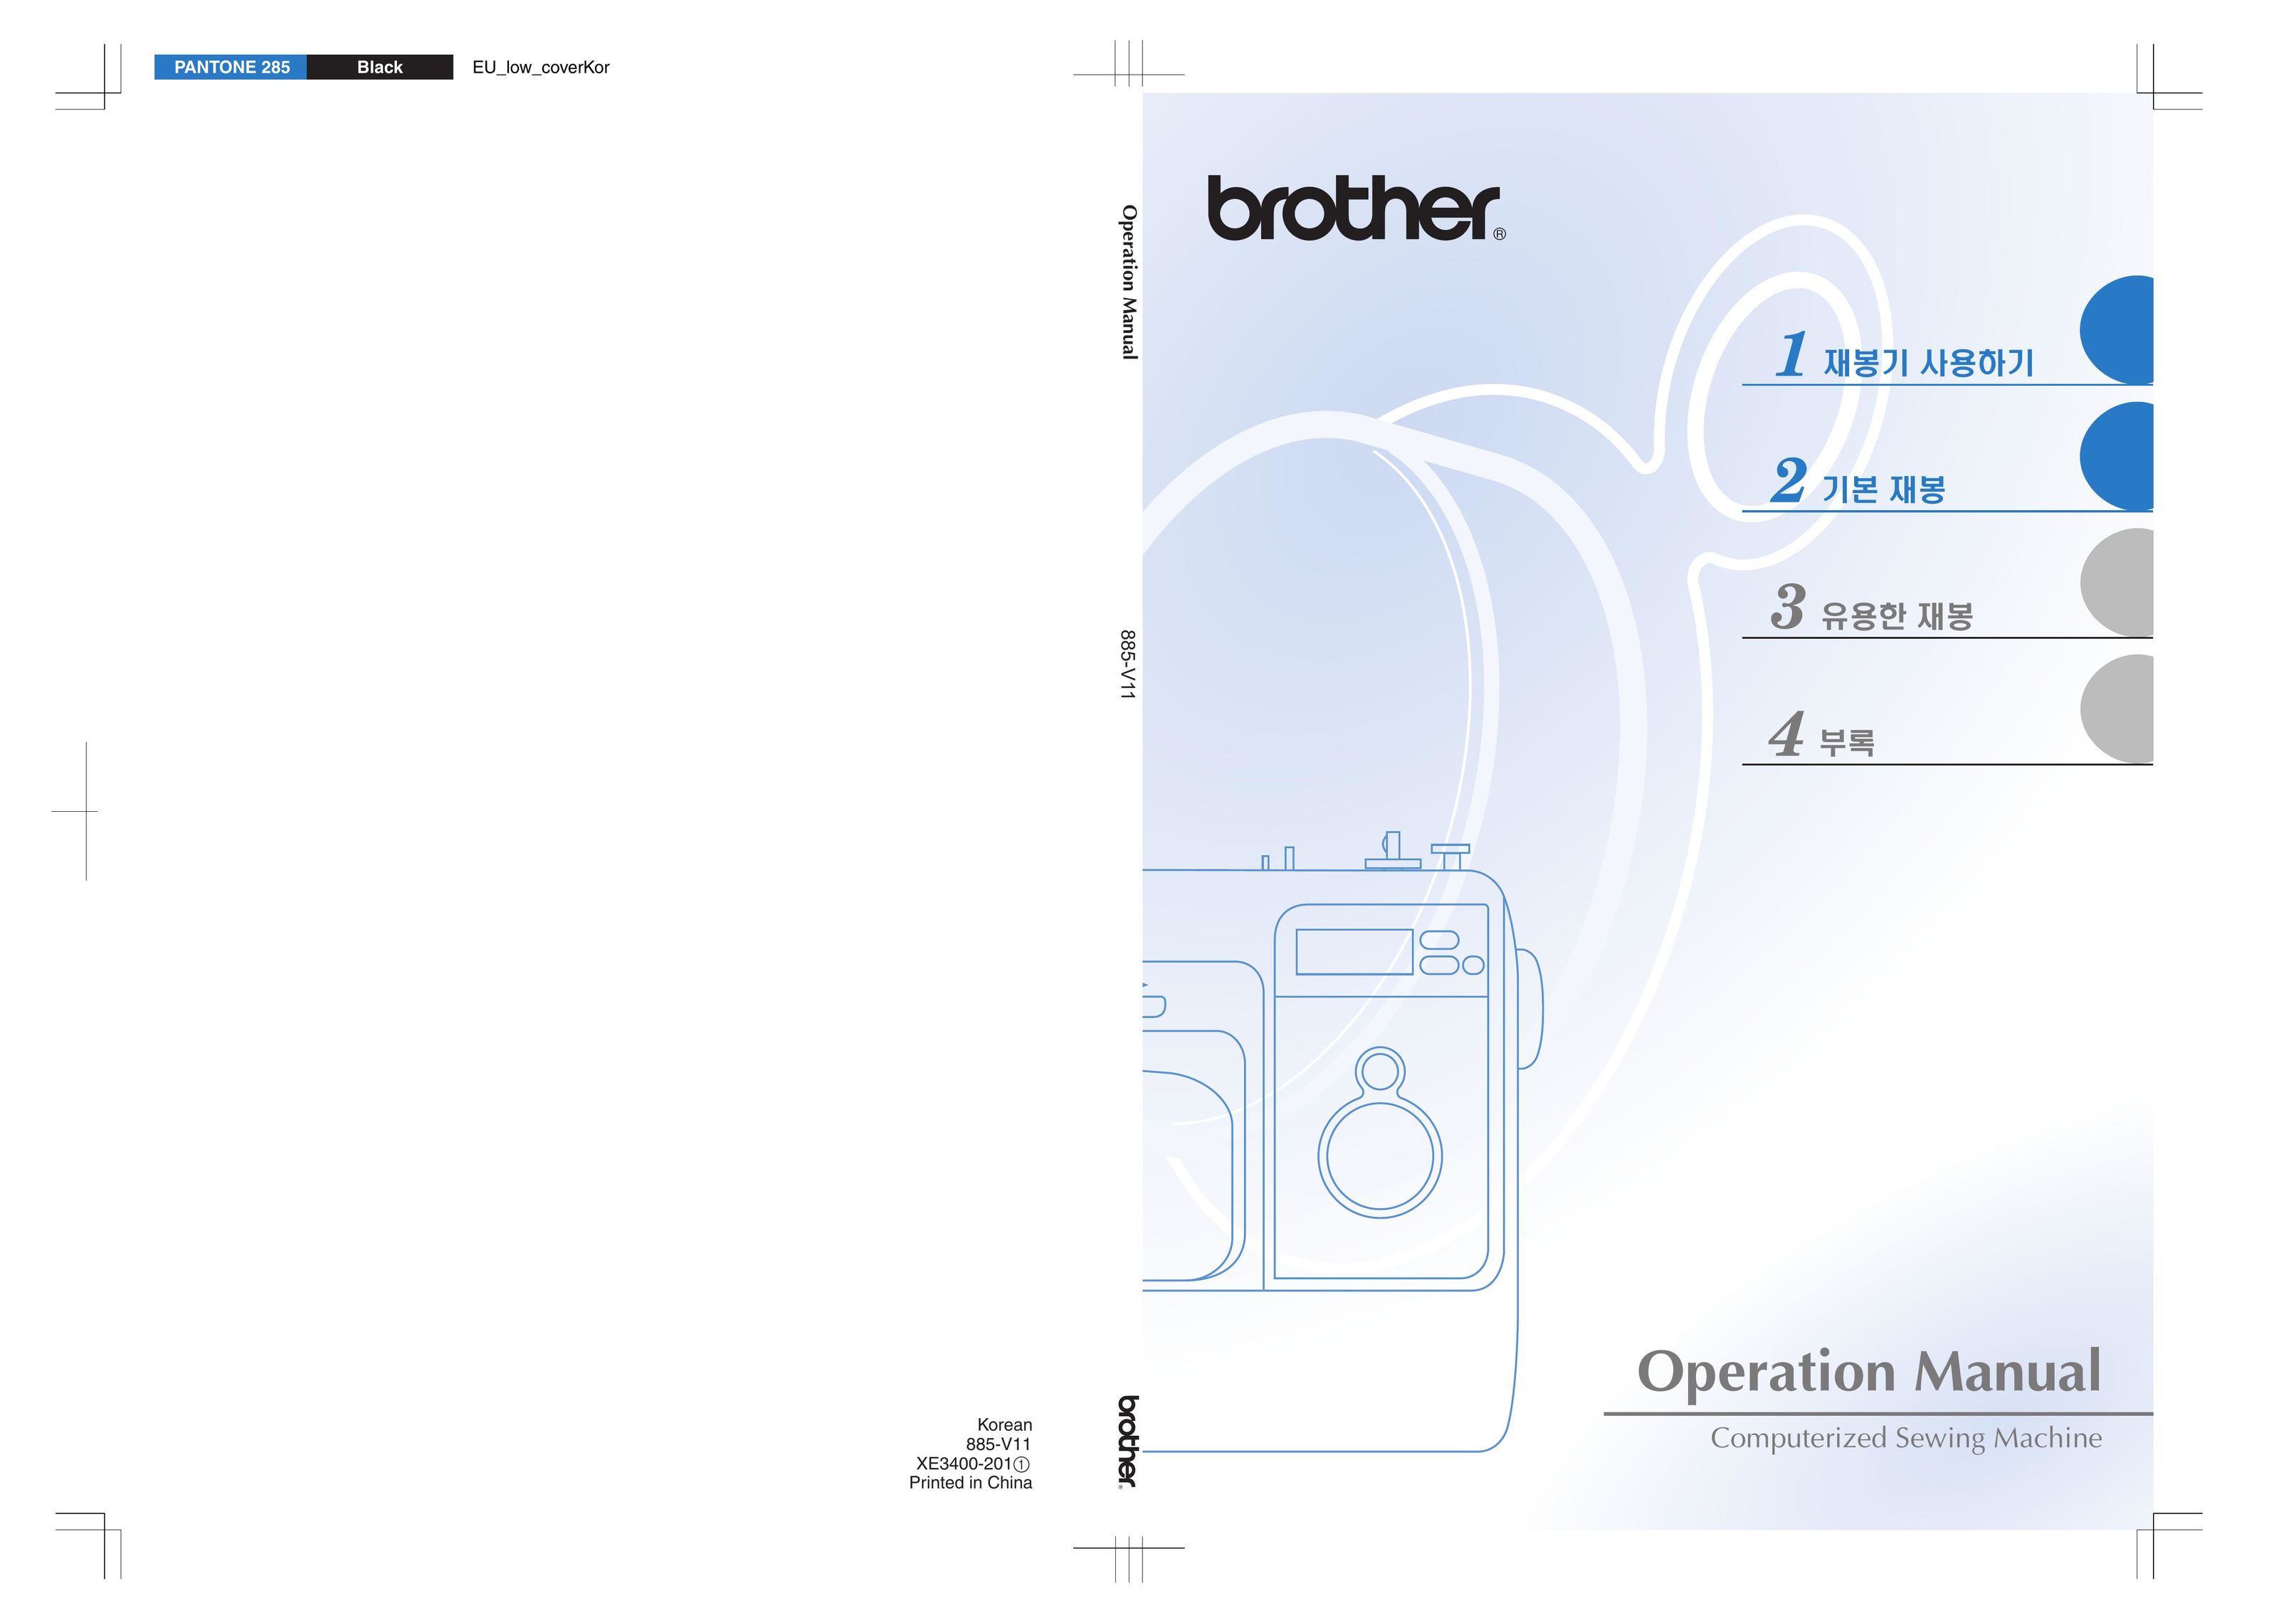 Brother 885-V11 Sewing Machine User Manual